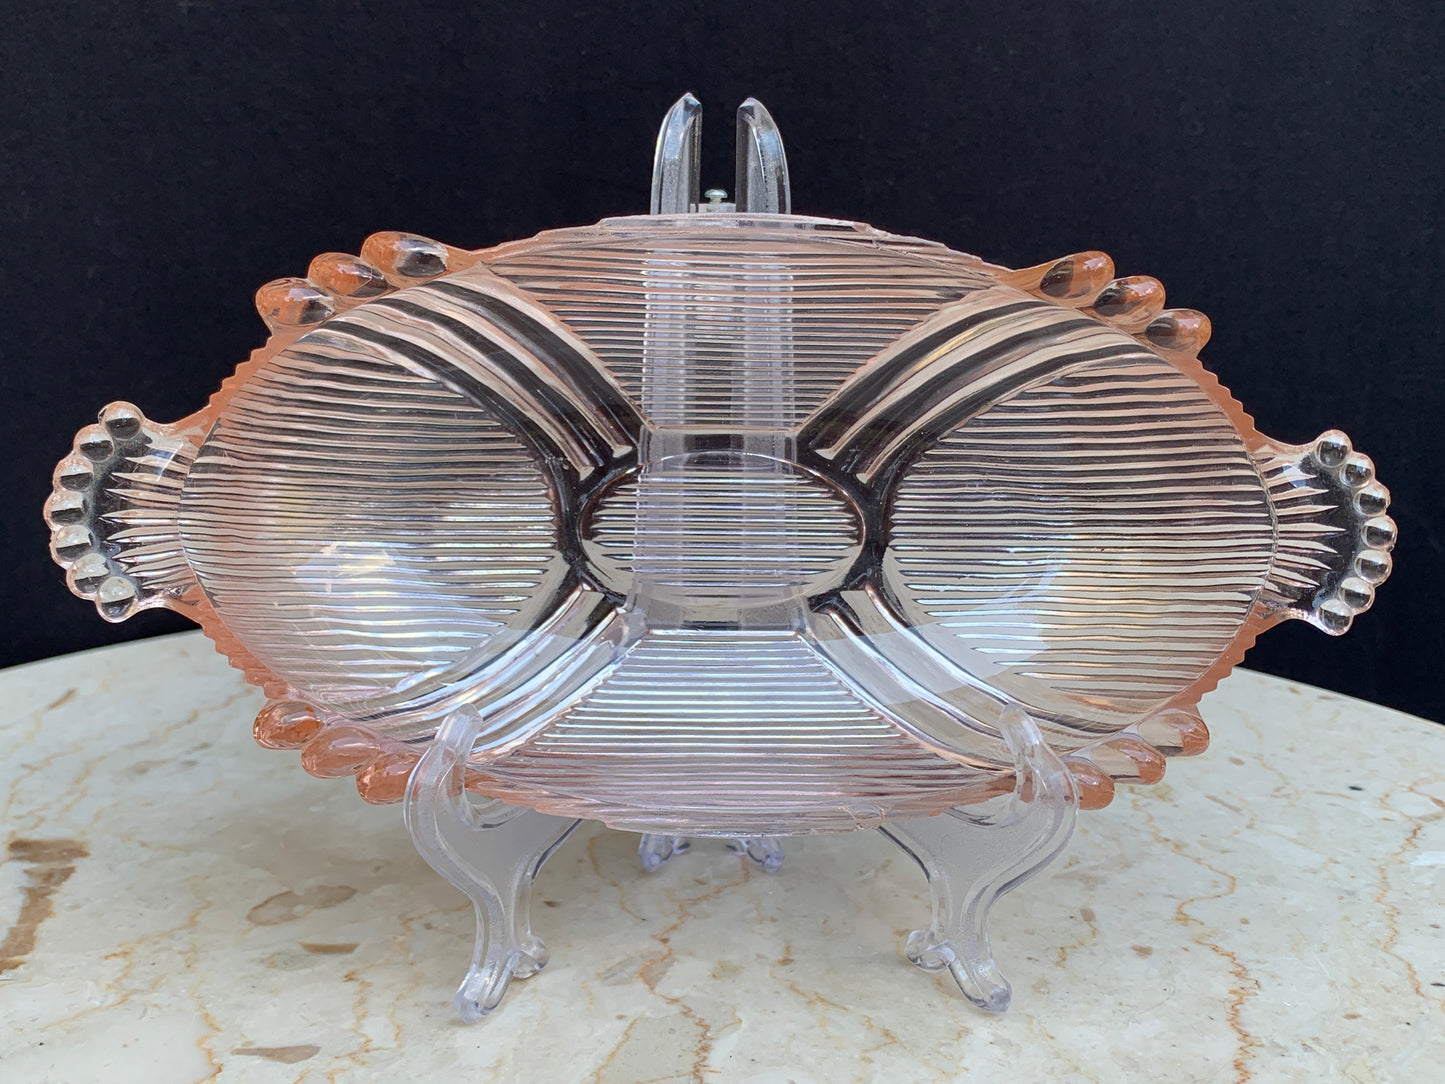 Pink Depression Glass Oval Dish with Beaded Handles Vintage Glass Jewelry Dish Catch All